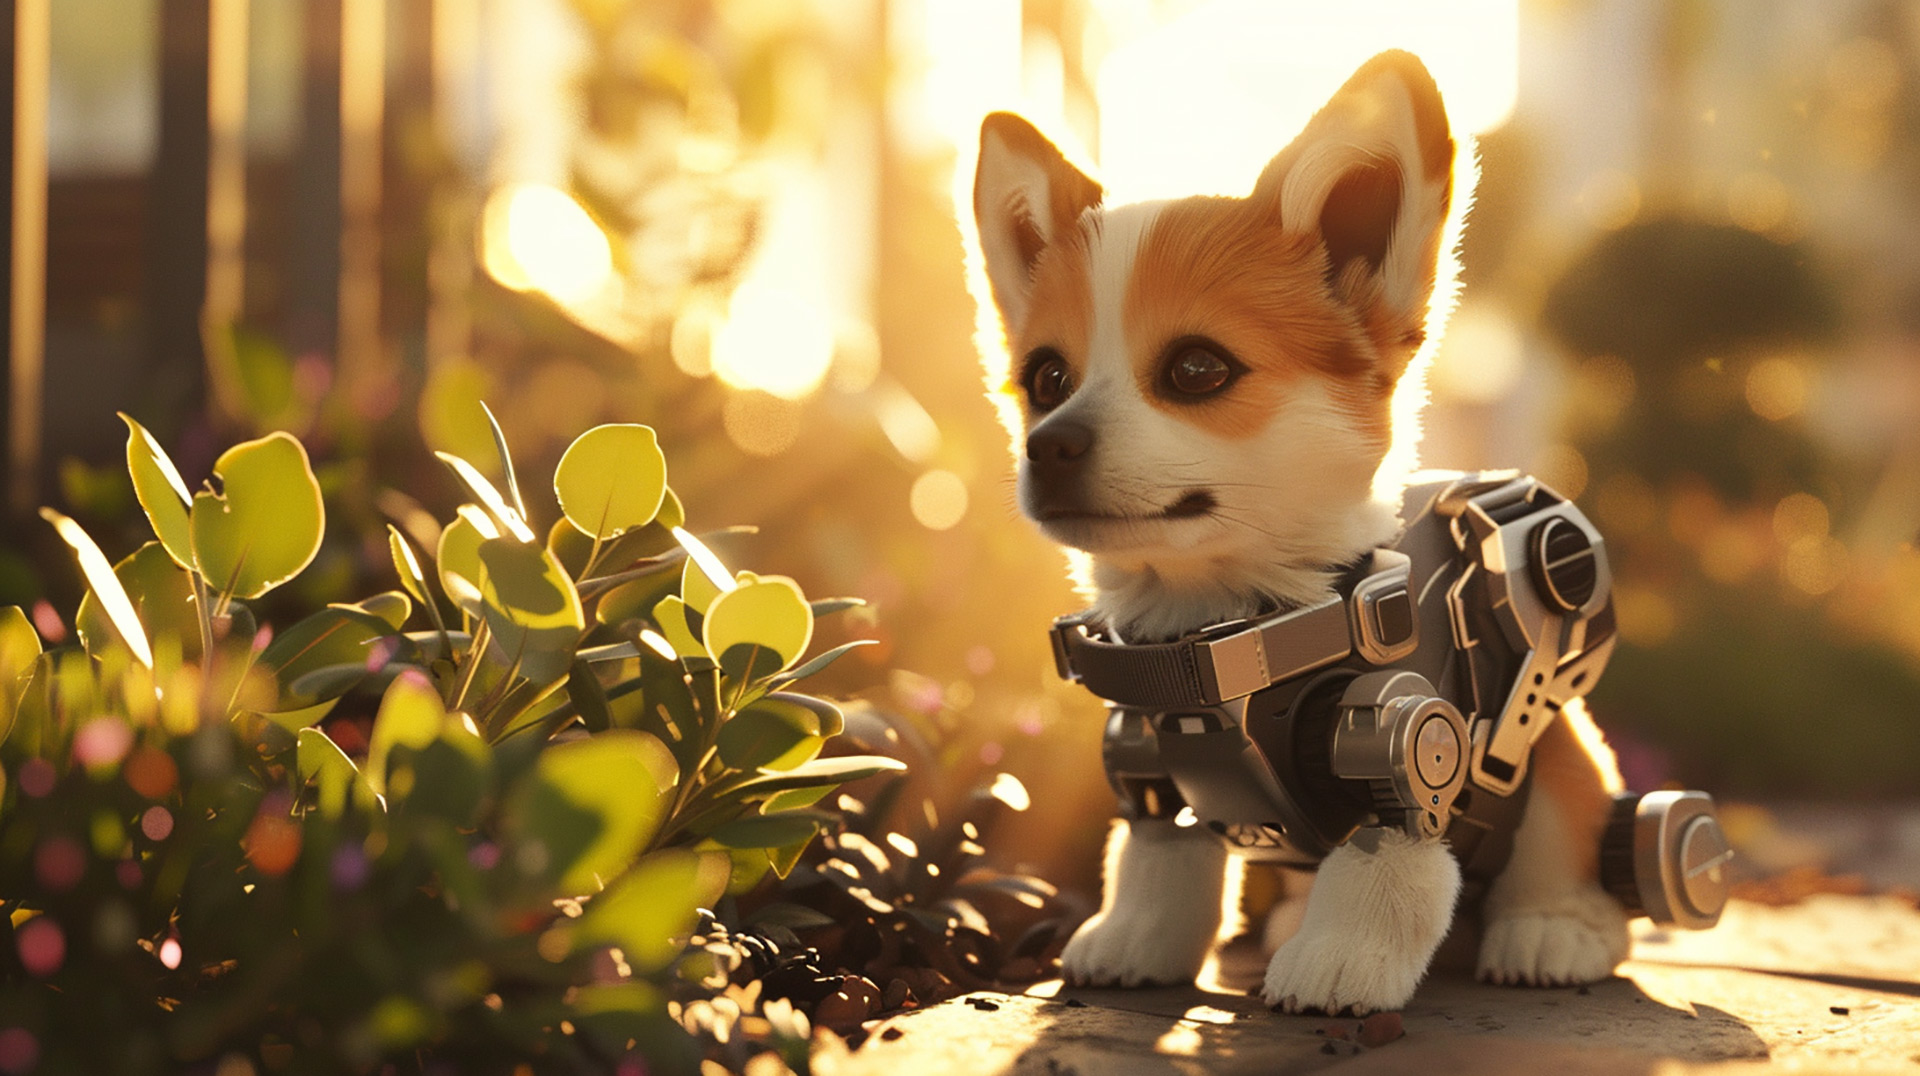 Brighten Your Day with Cute AI Dog Wallpapers in 4K